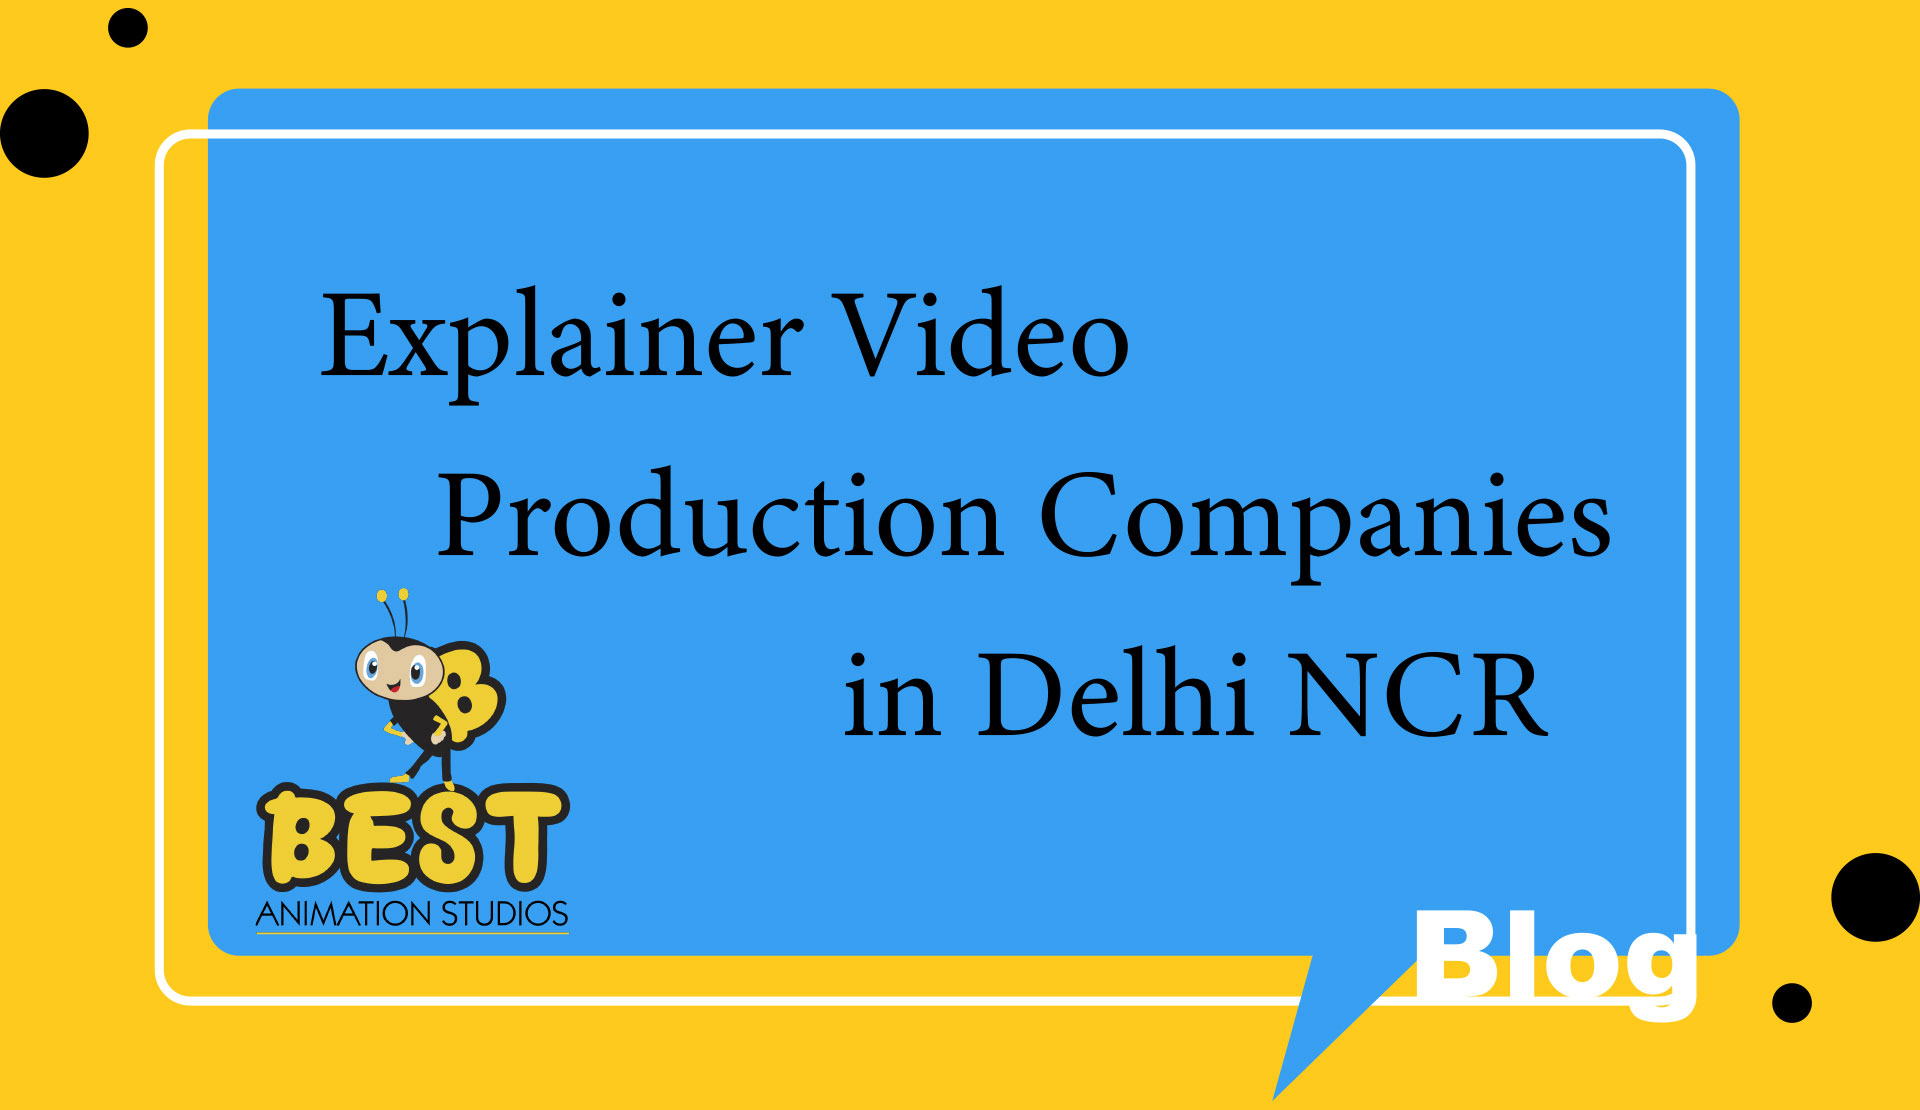 Explainer Video Production Companies in Delhi NCR